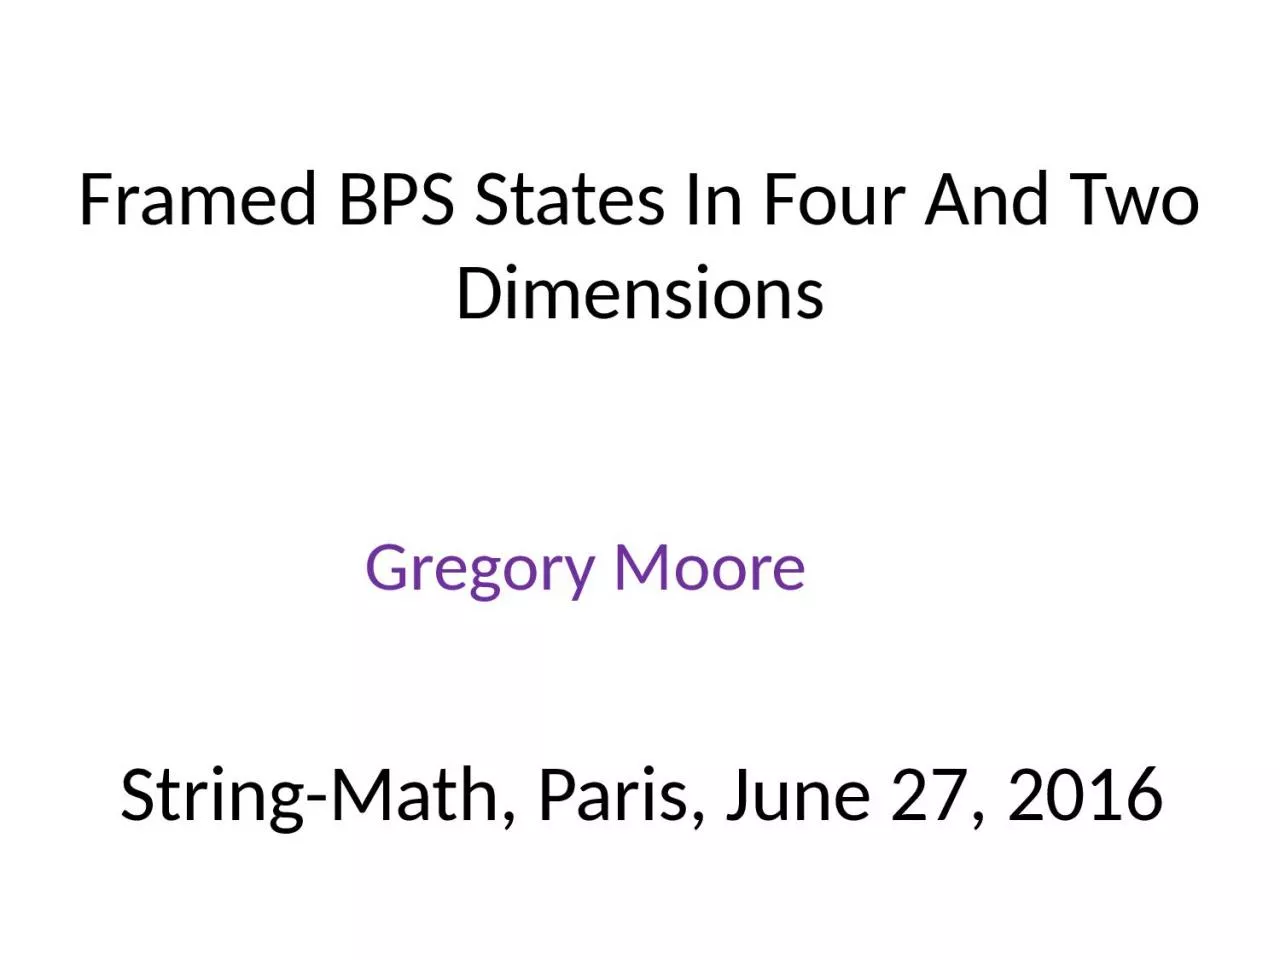 Framed BPS States In Four And Two Dimensions